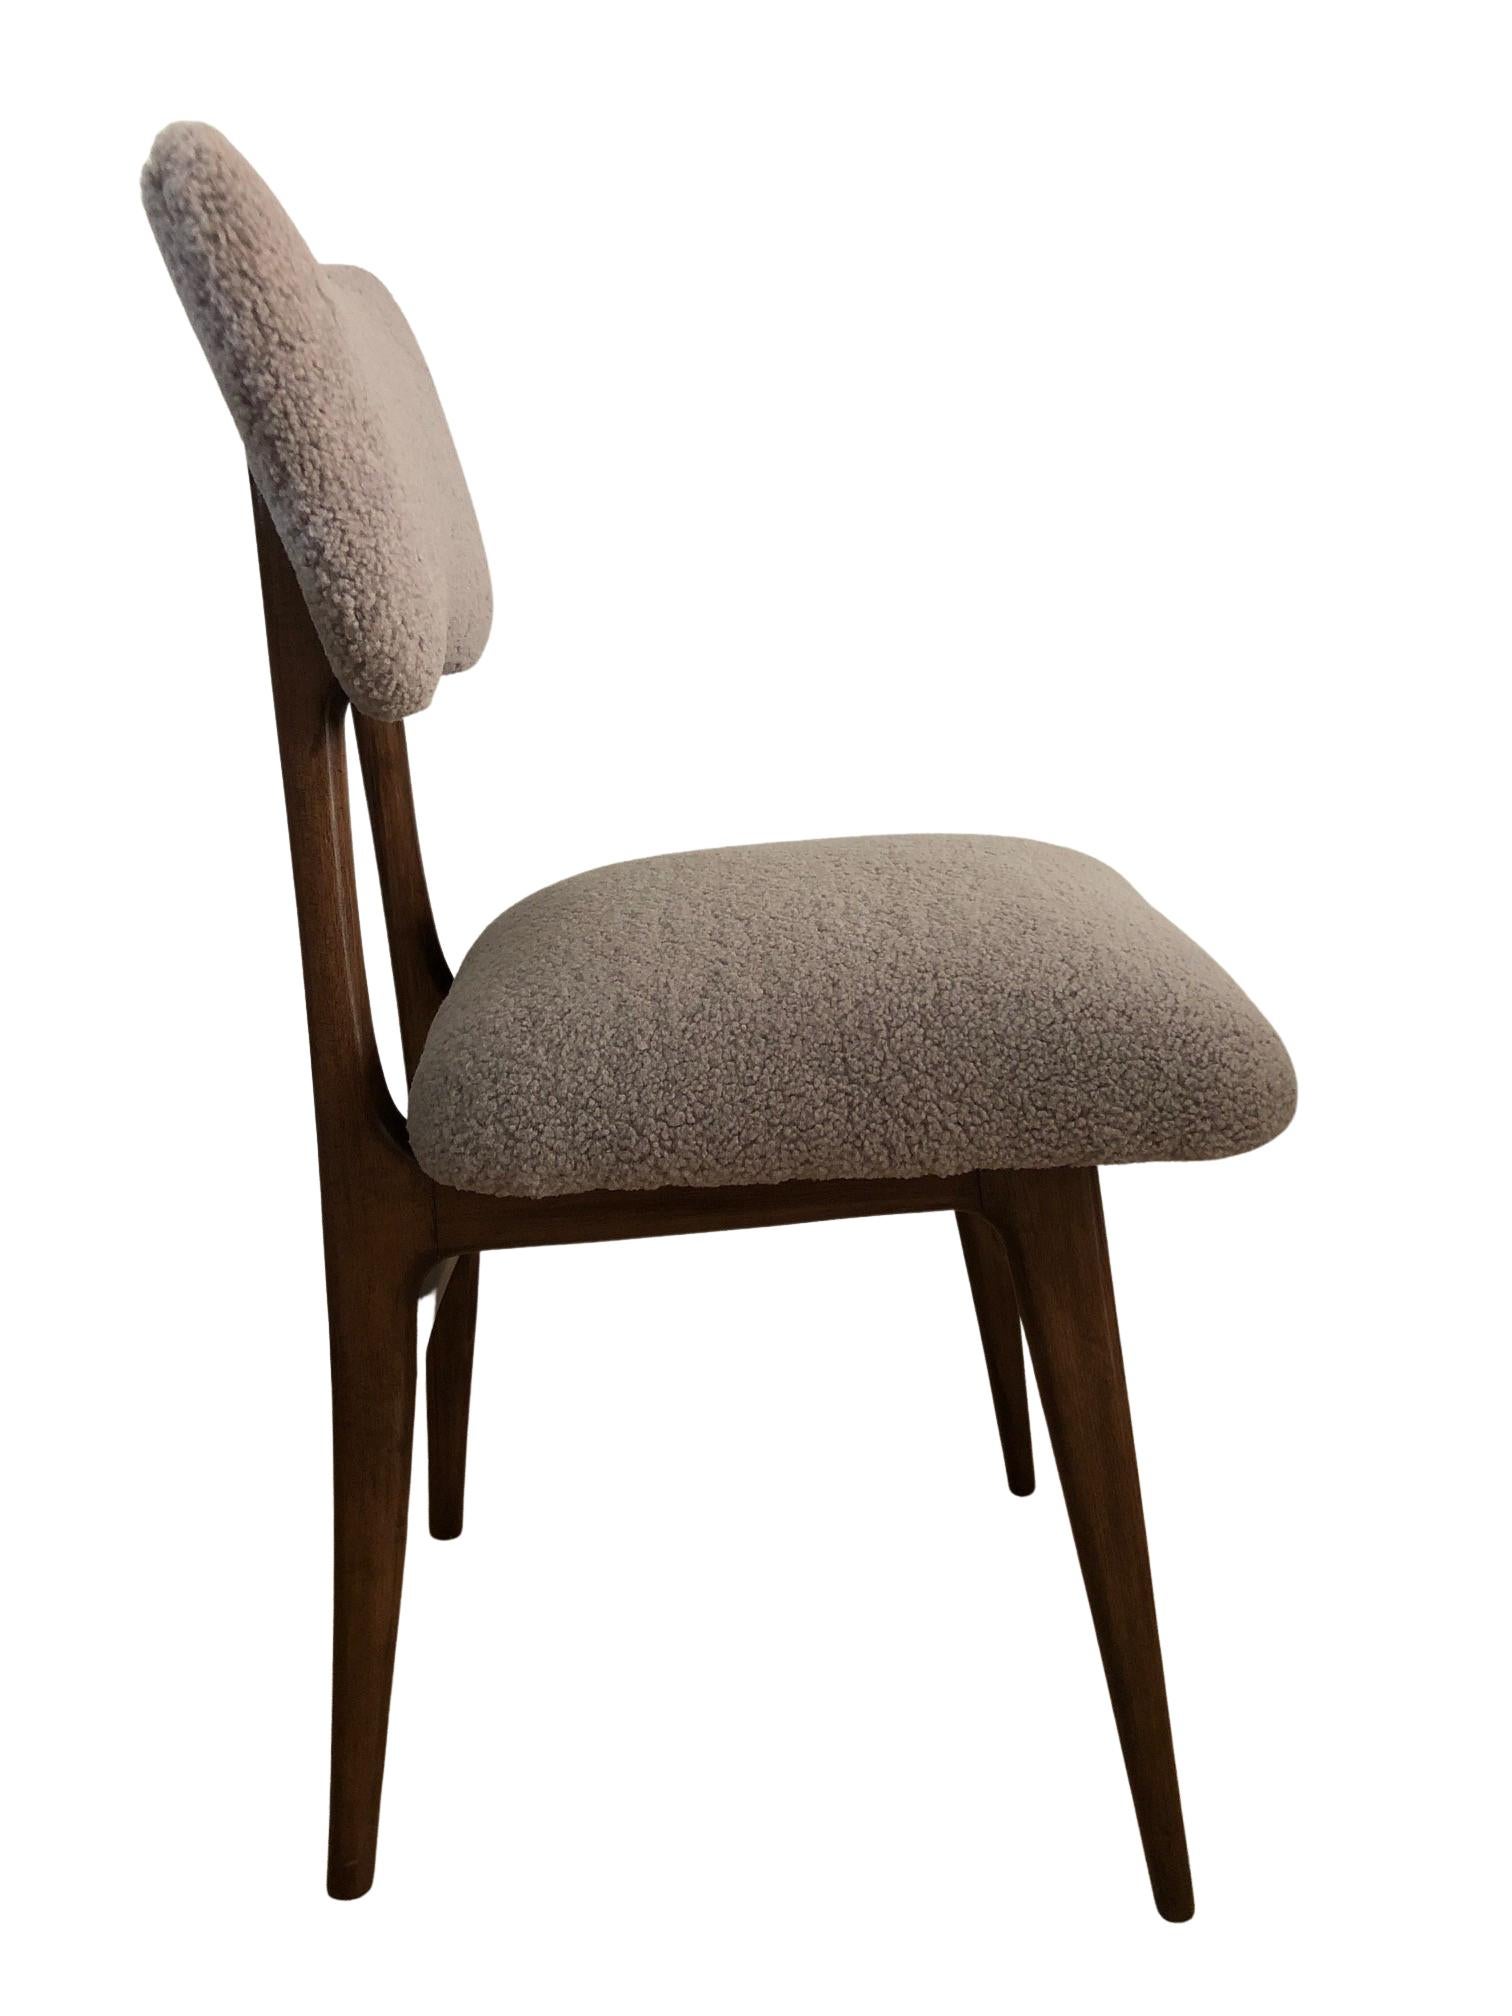 Polish Set of 6 Midcentury Beige Bouclé Dining Chairs, 1960s For Sale